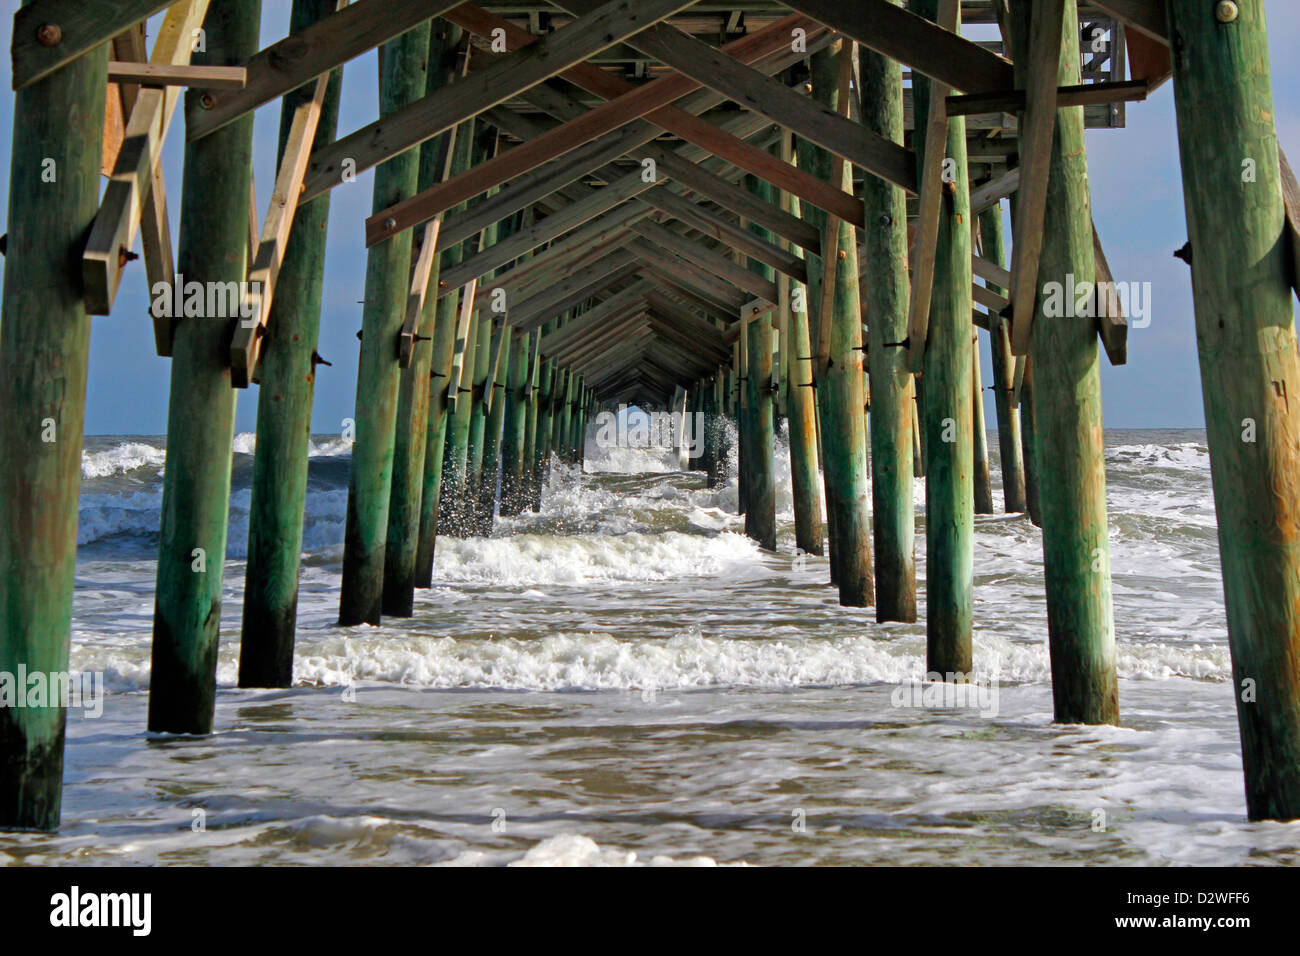 The underside of a fishing pier extending out through the surf. Stock Photo